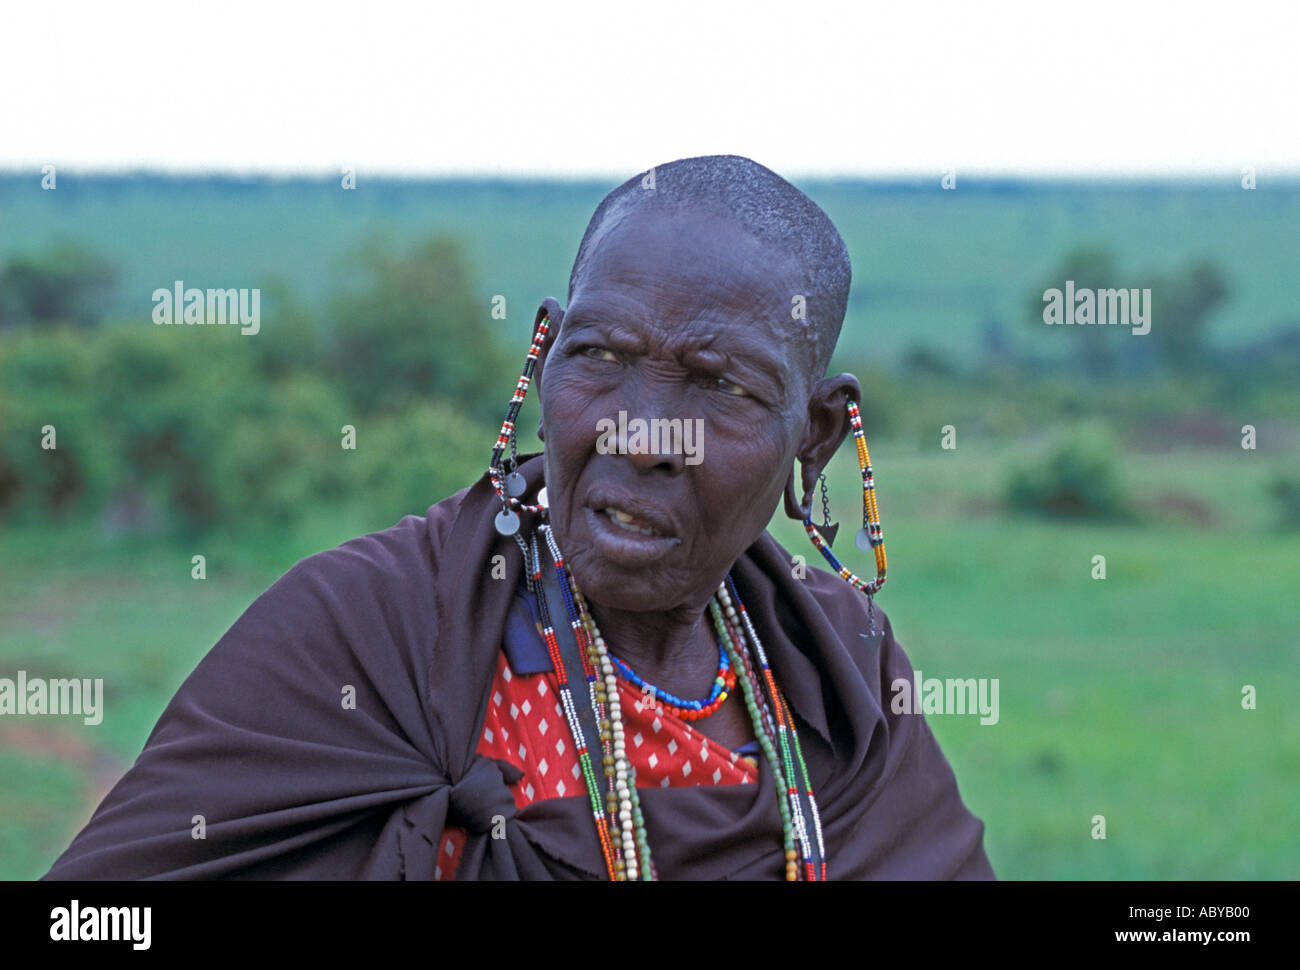 AFRICA KENYA Masai Mara National Reserve Portrait of Masai woman with traditional pierced ears and beads Stock Photo